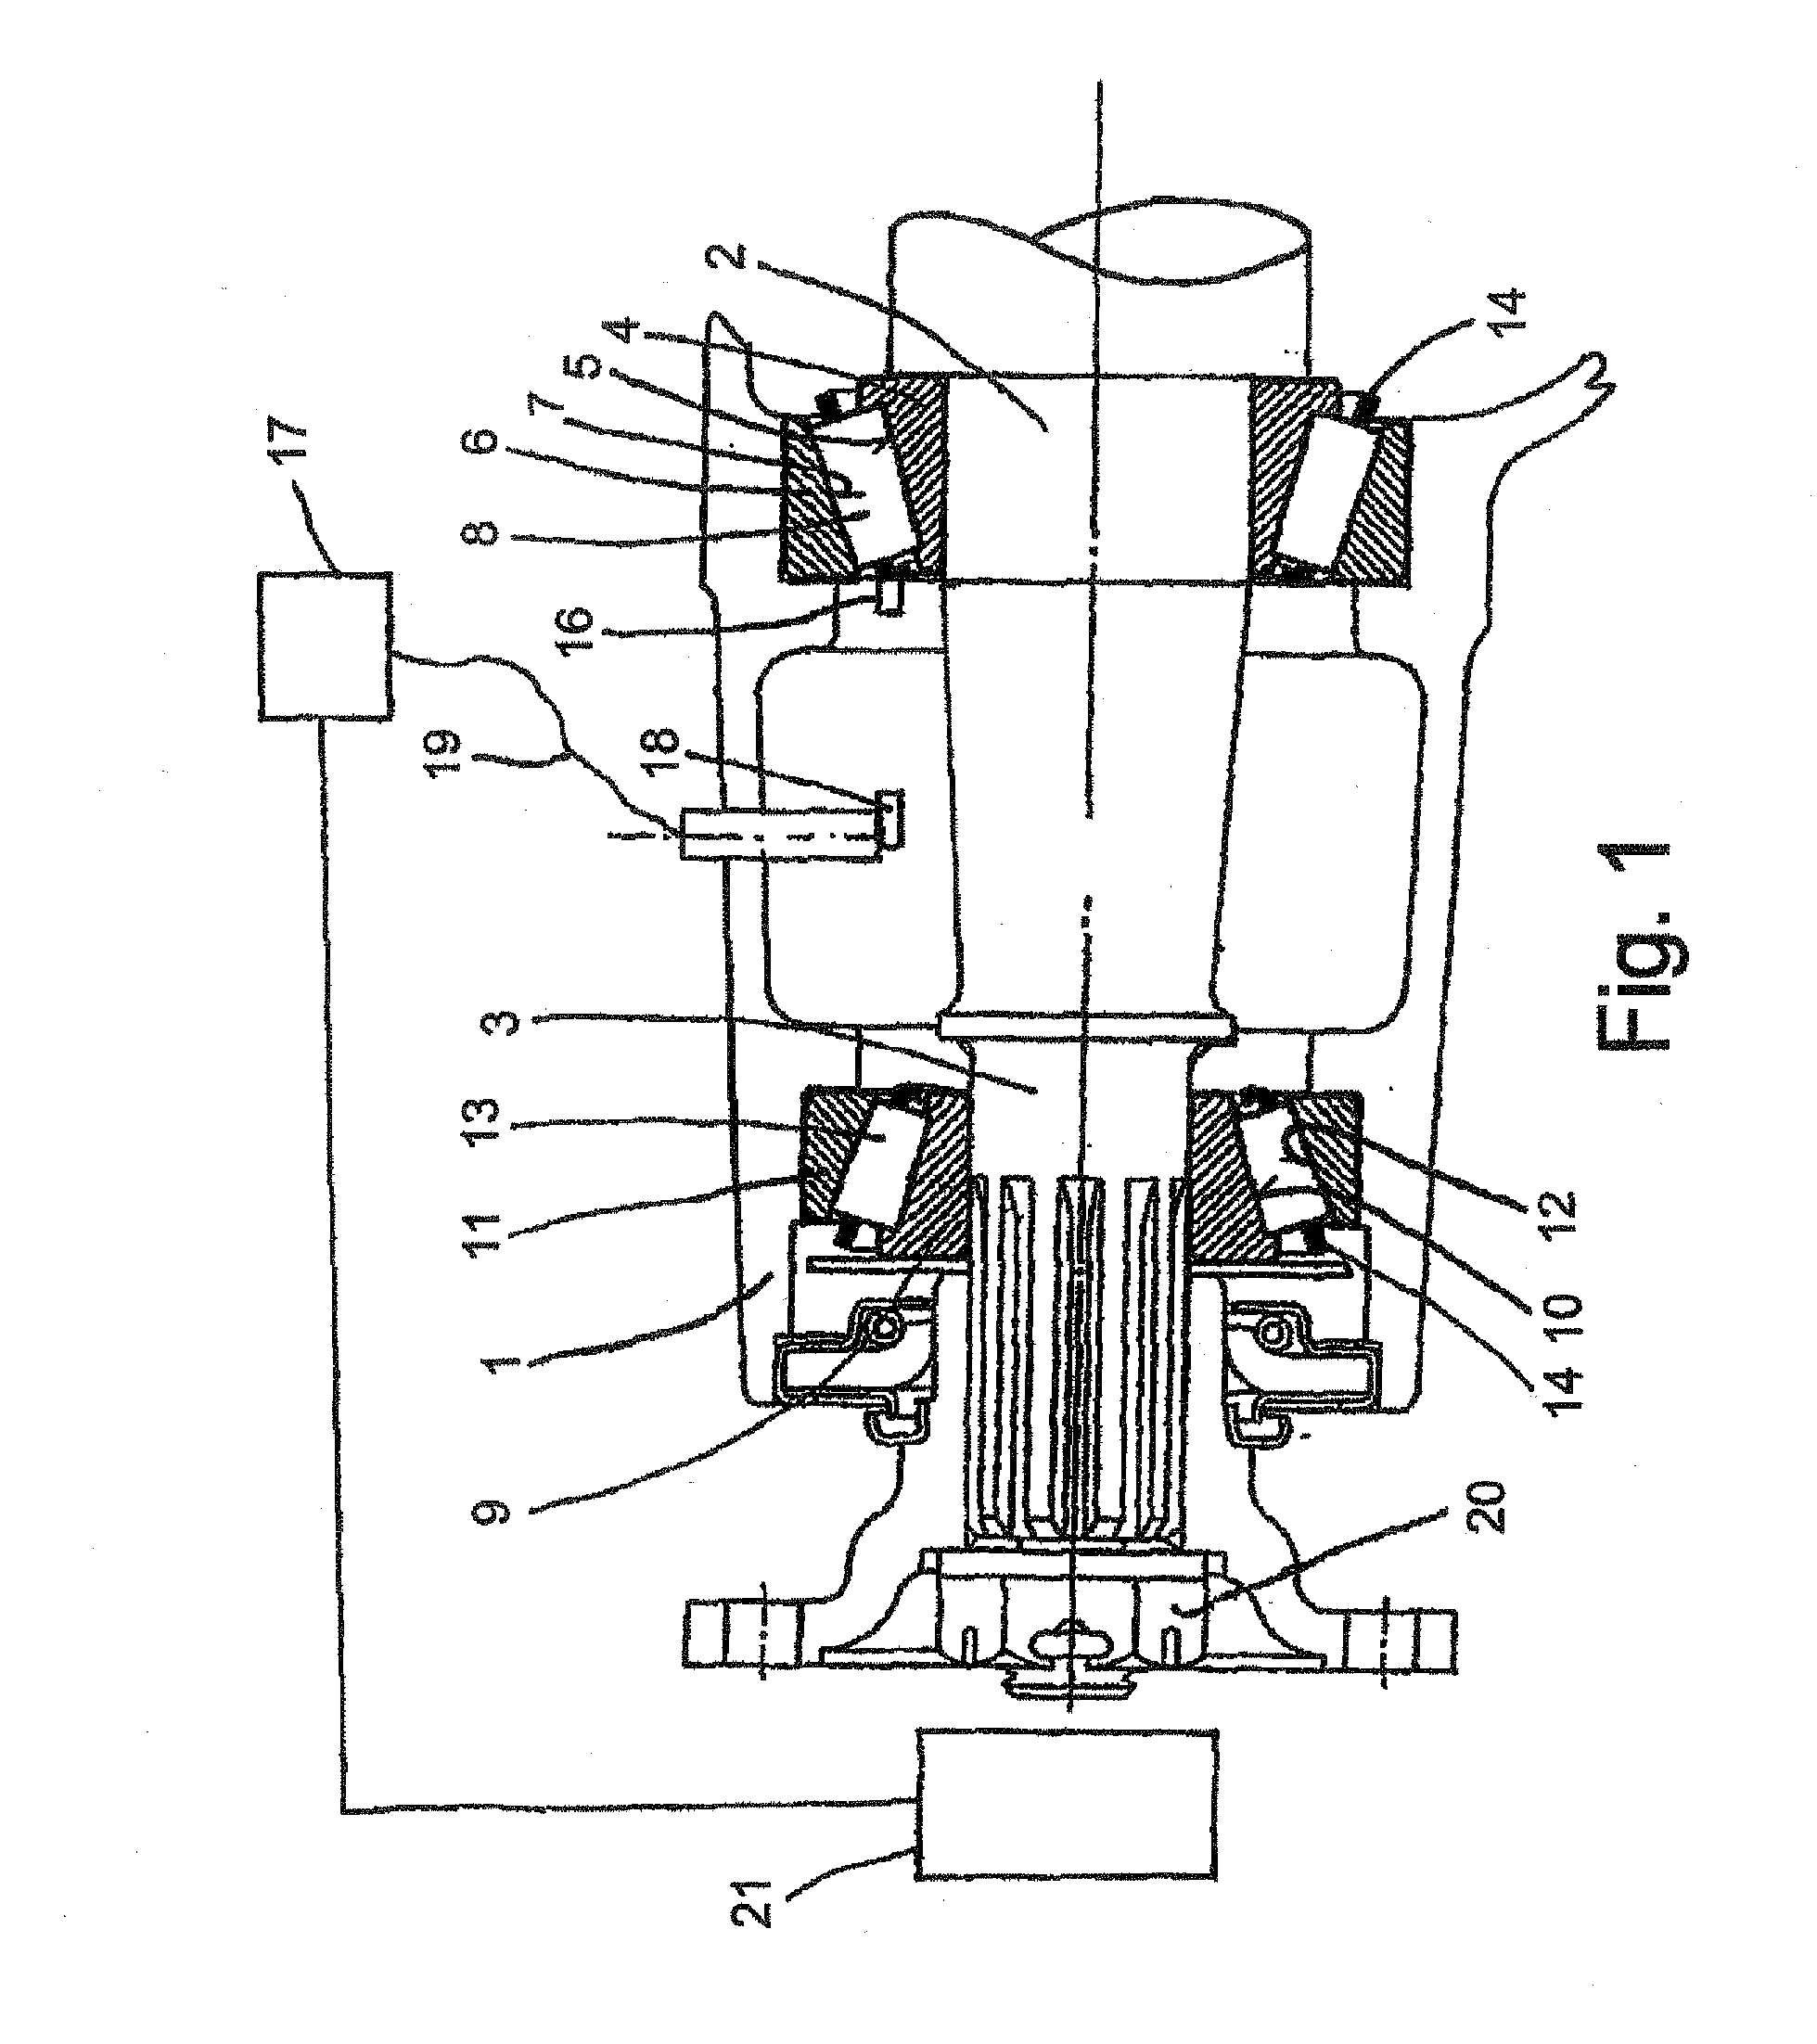 Method and apparatus for setting the bearing play or the prestress of Anti-friction bearing arrangements